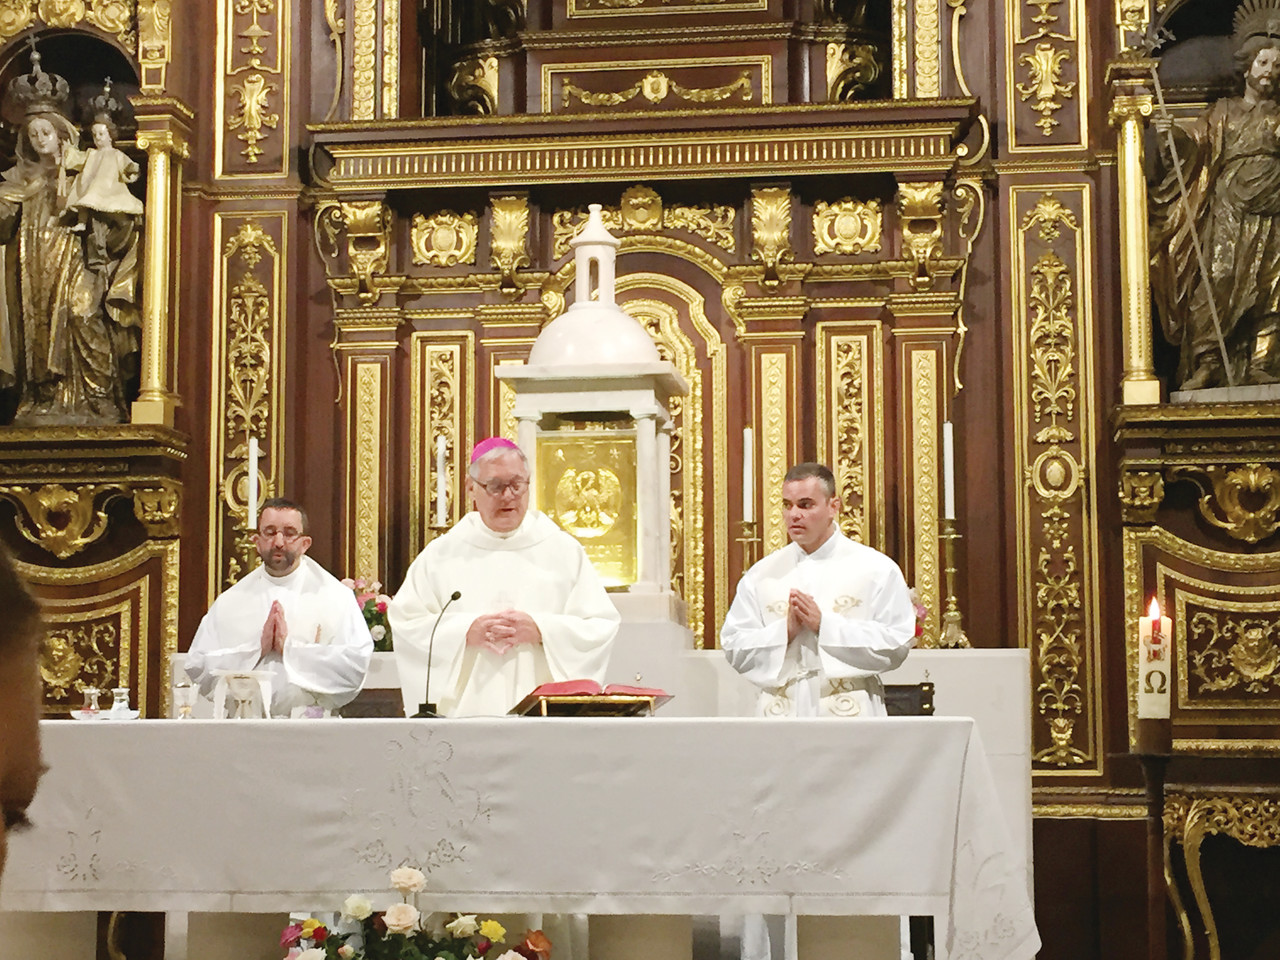 Bishop Thomas J. Tobin concelebrates Mass with Father Carl Fisette, at left, and Father Rodrigues, at right, at the Carmelite monastery where Sister Lúcia spent her last years on earth. Sister Lúcia who including her cousins, Jacinta and Francisco Marto, witnessed Marian apparitions in Fatima in 1917.